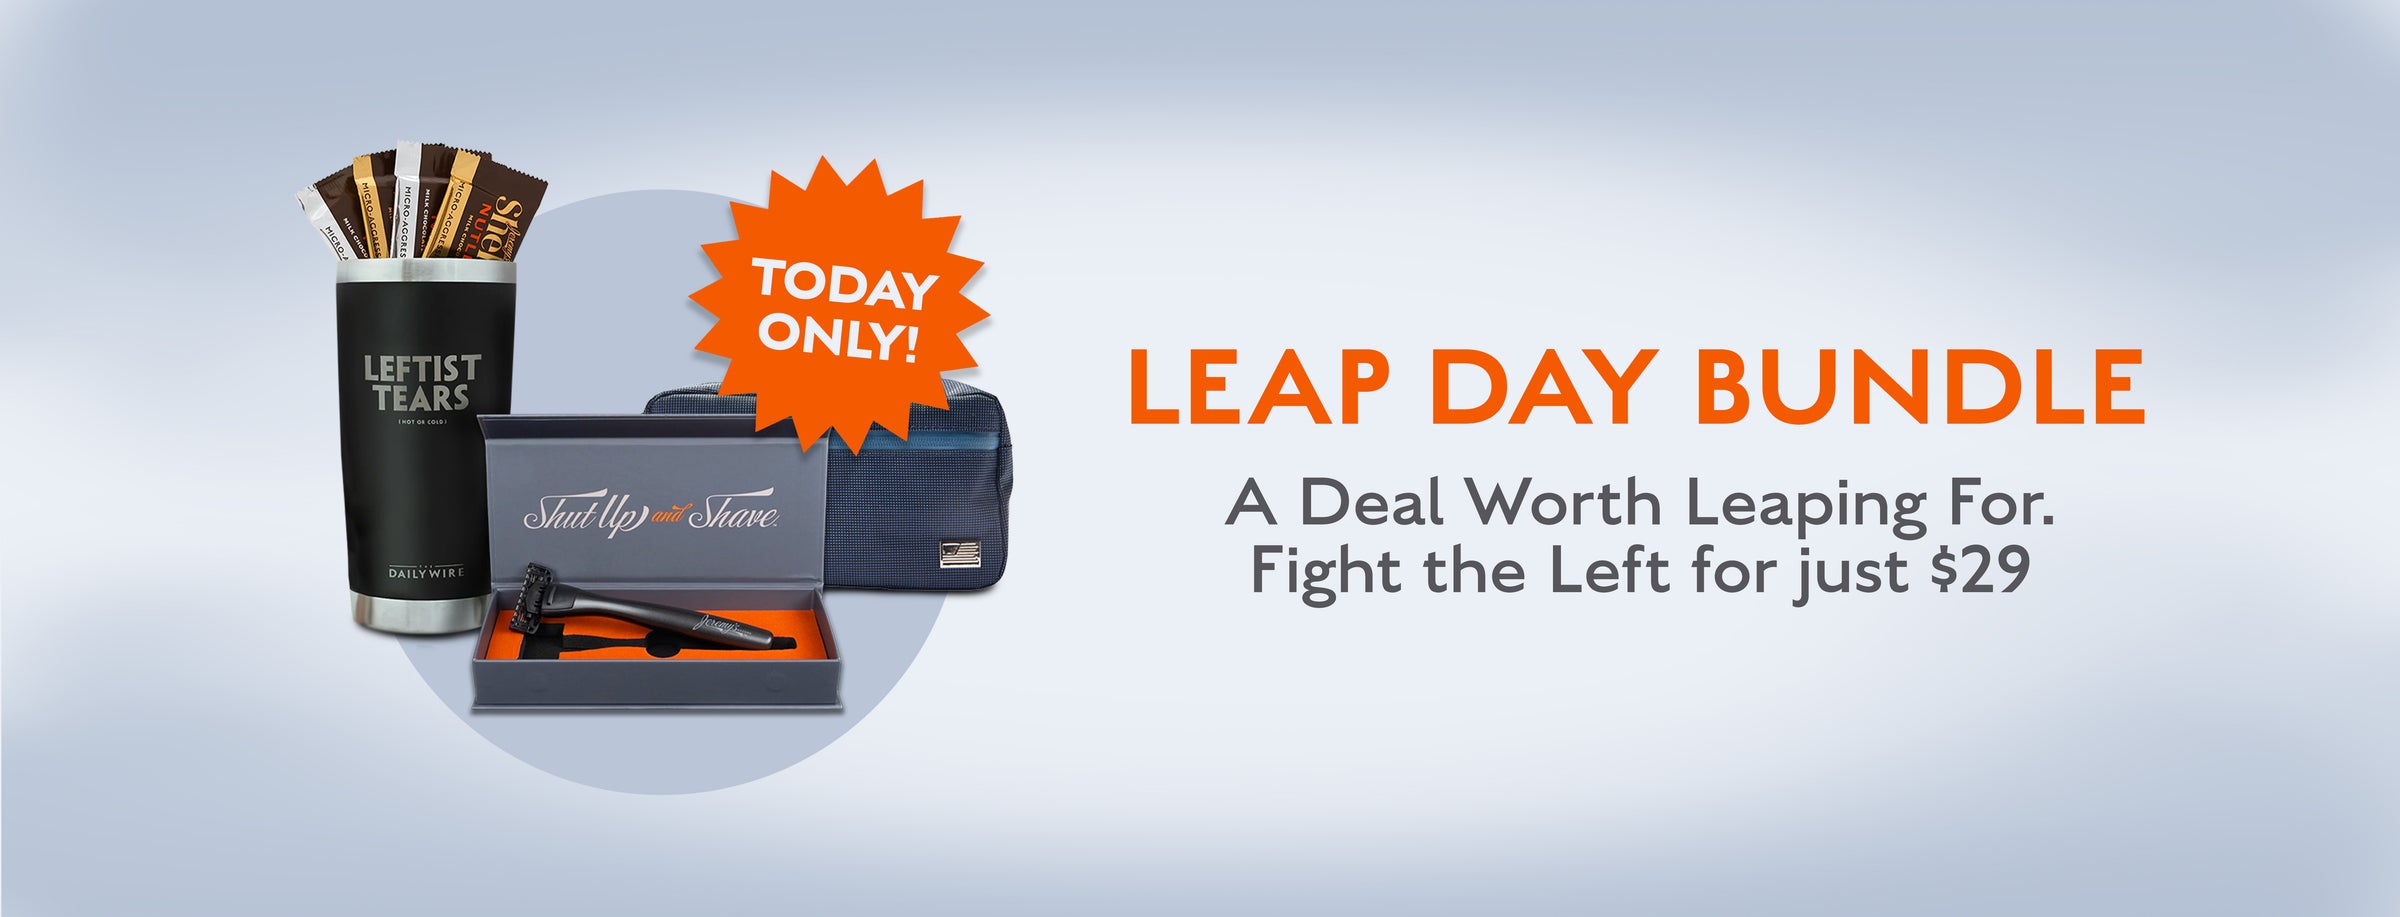 TODAY ONLY! Leap Day Bundle. A Deal Worth Leaping For. Fight the Left for just $29.